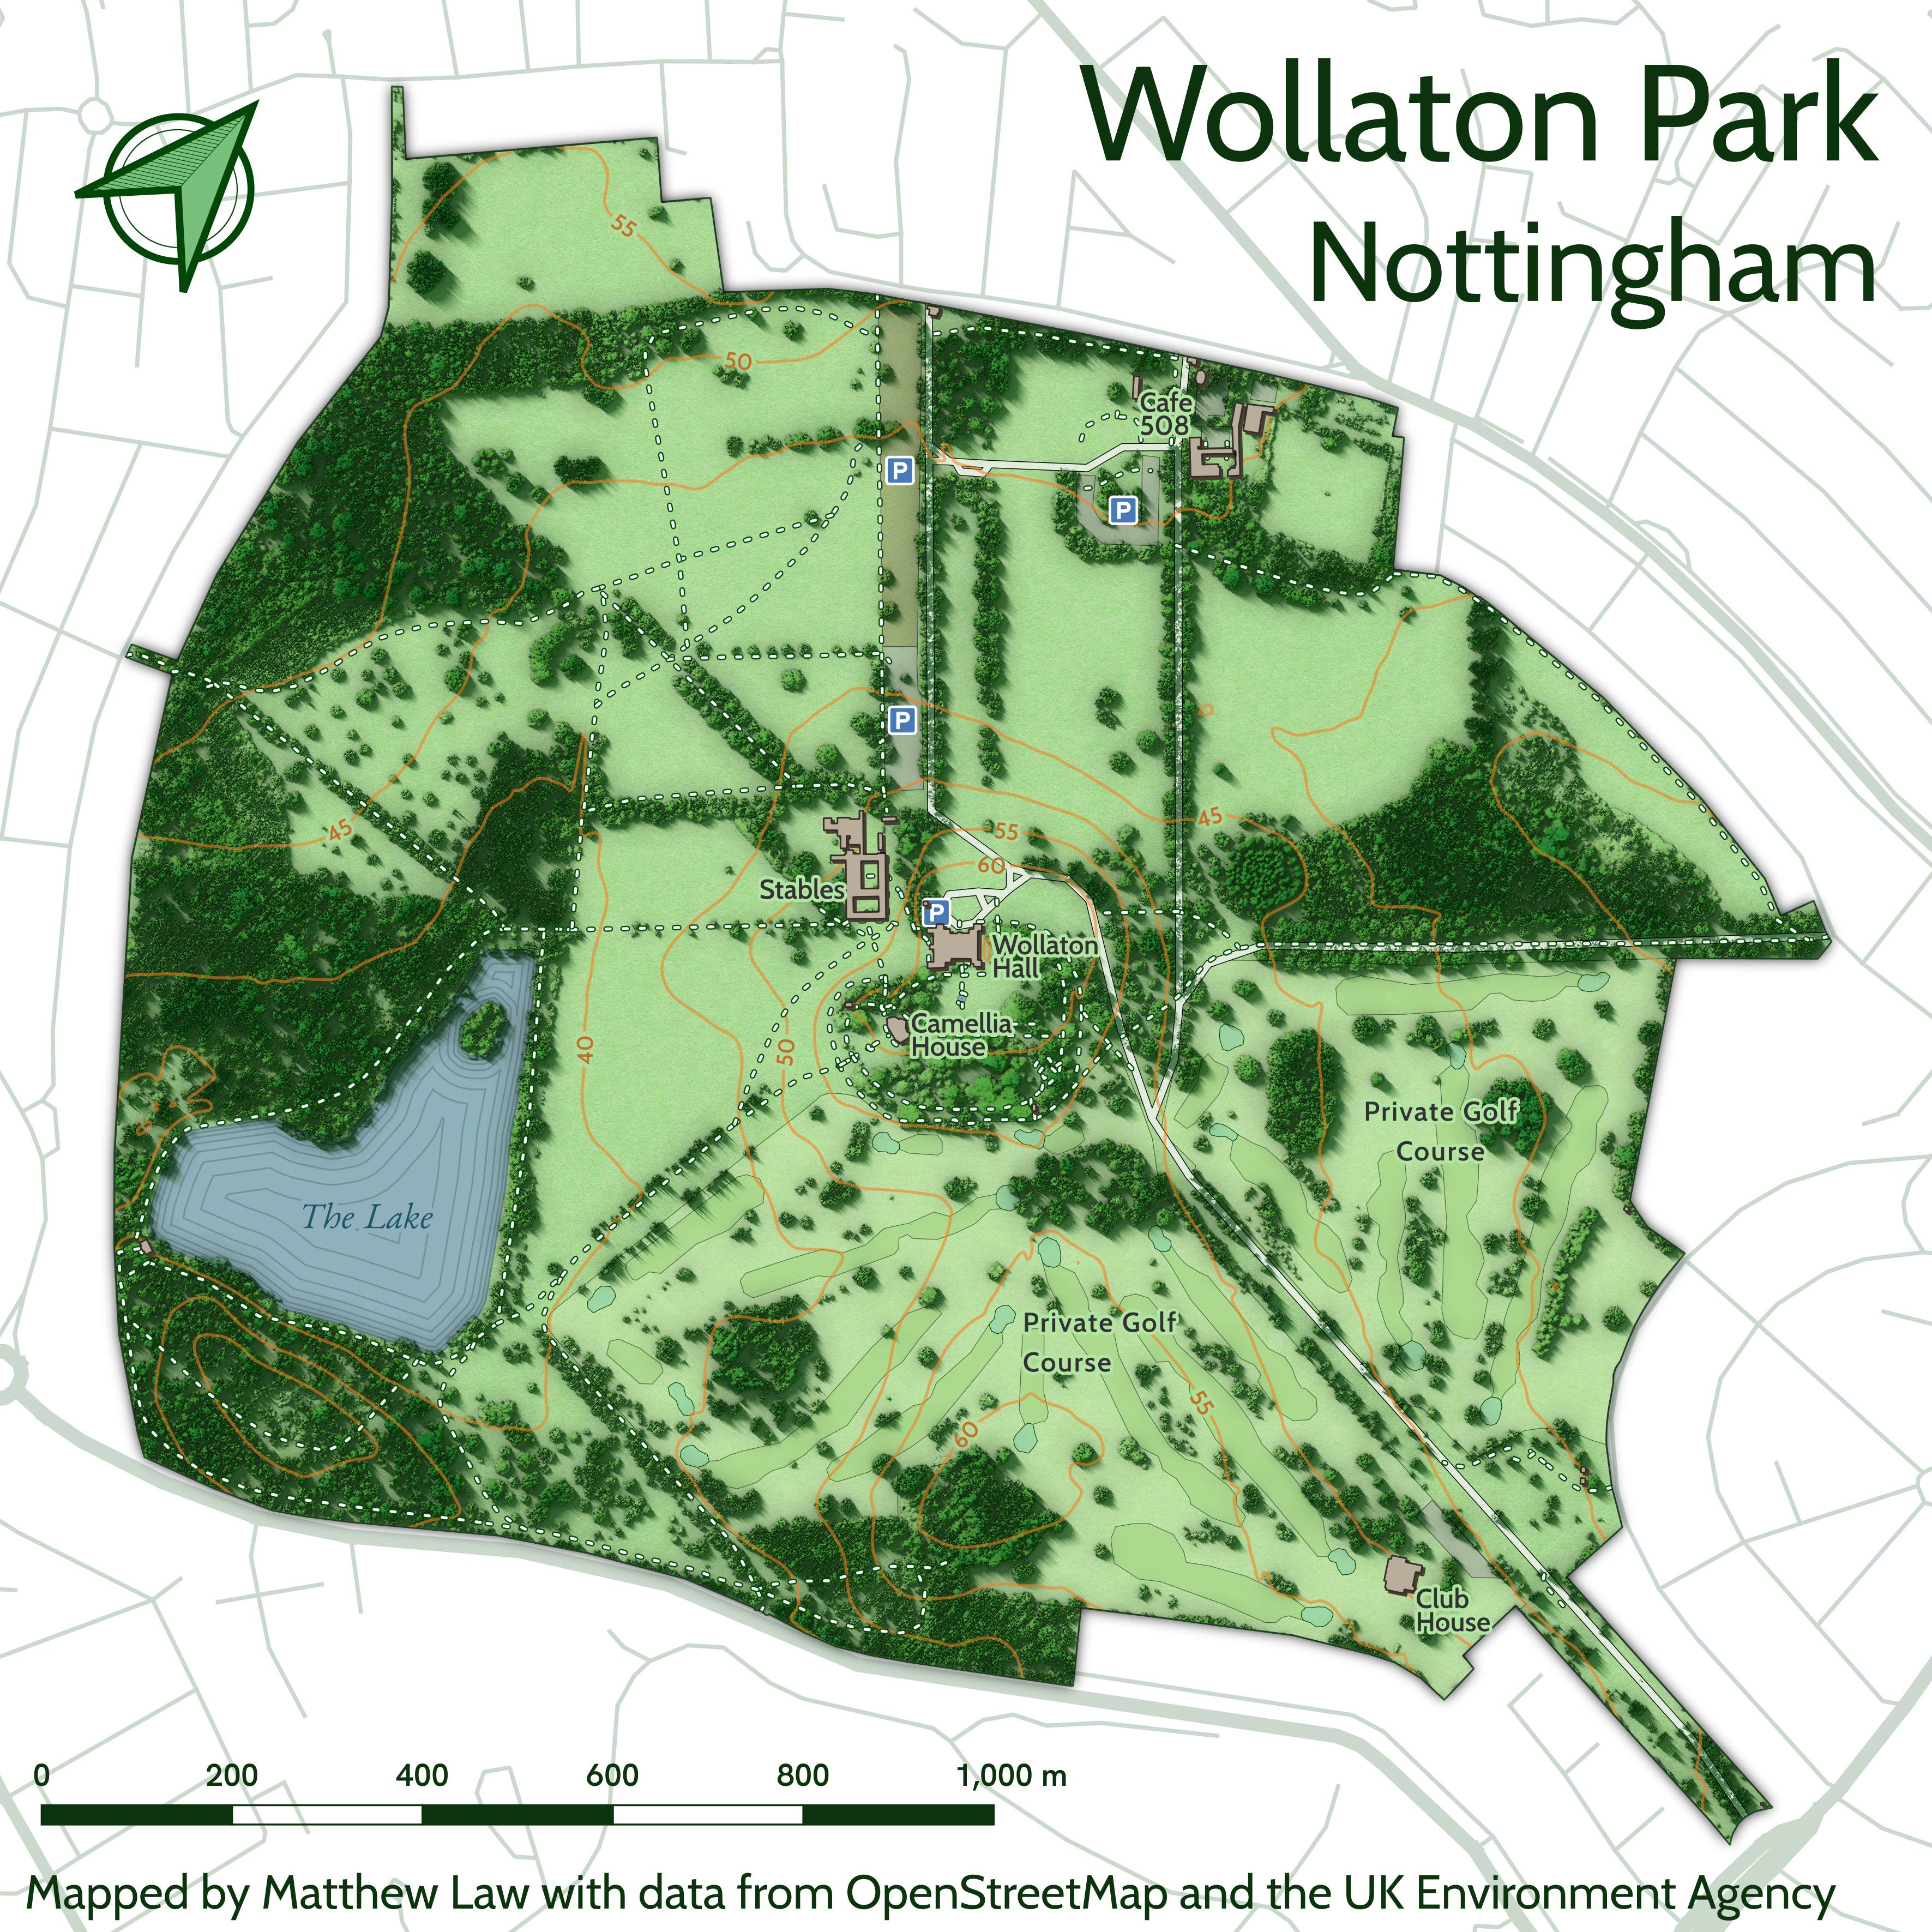 A really great map of Wollaton Park